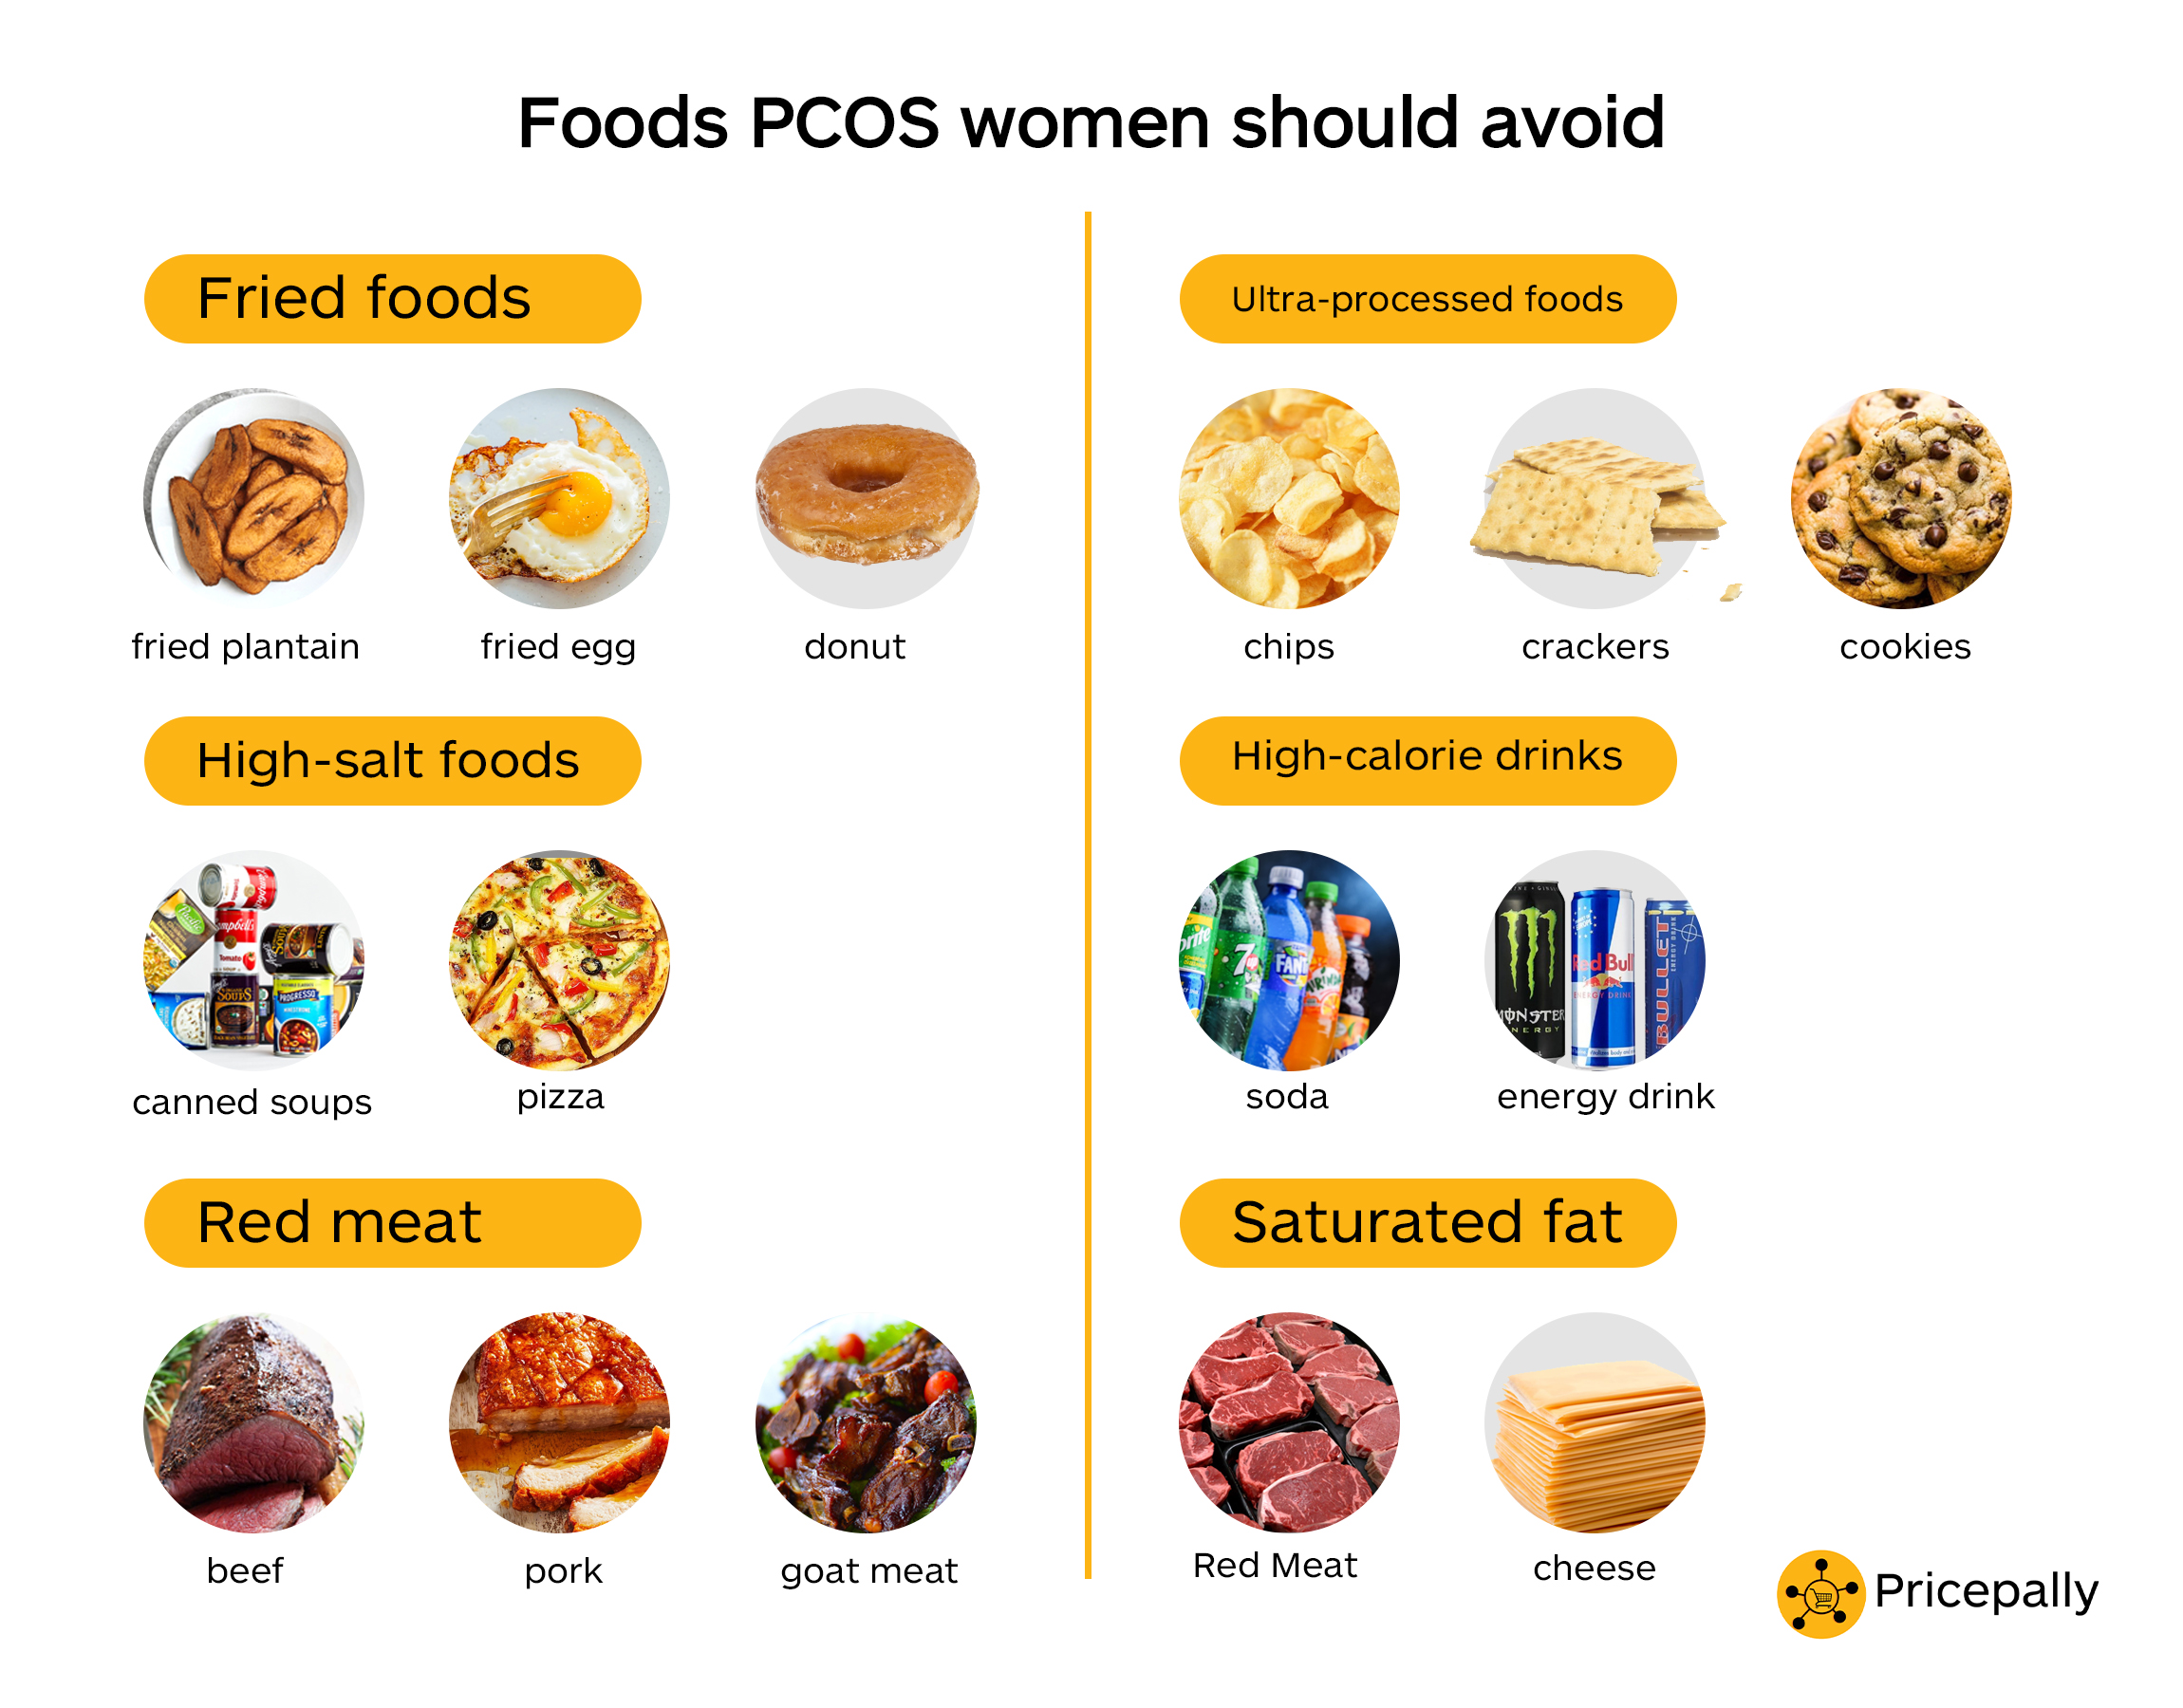 The worst foods for PCOS women in Nigeria